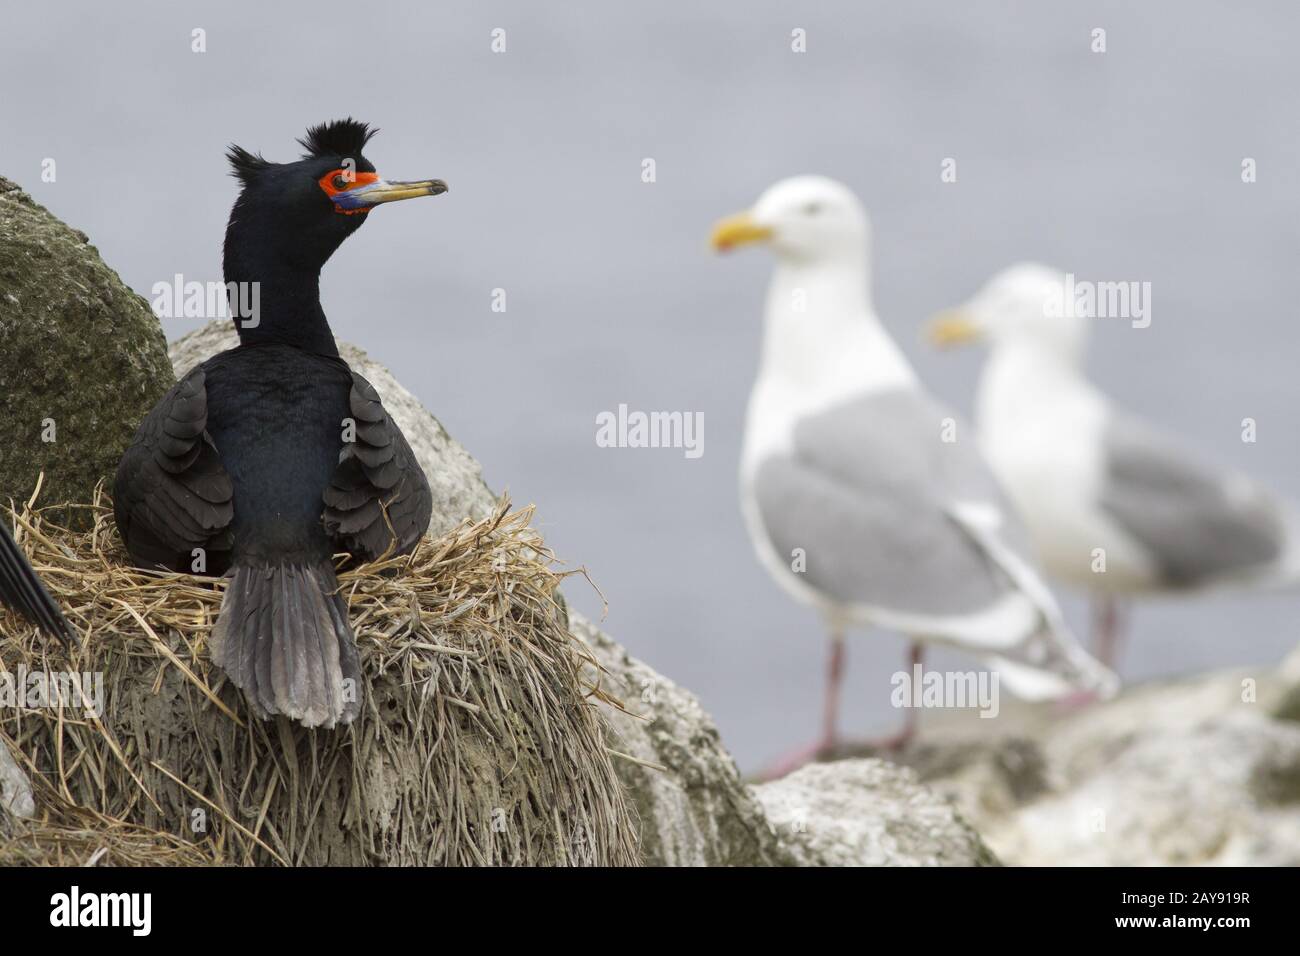 RED-FACED CORMORANT sitting in the nest near this are gray-winged seagulls Stock Photo